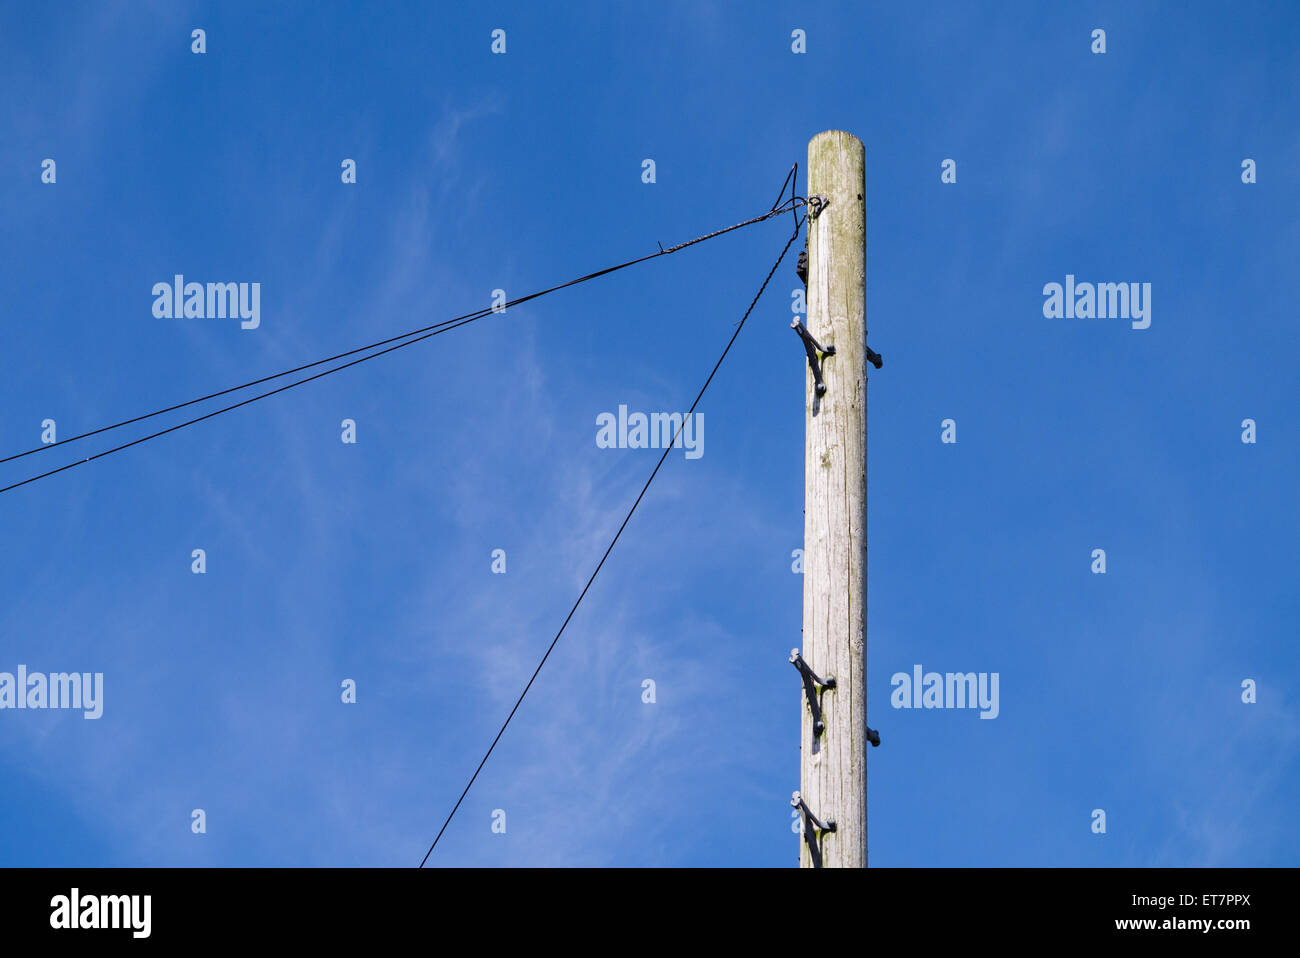 Wooden telegraph pole with phone lines against a bright blue sky with copyspace Stock Photo